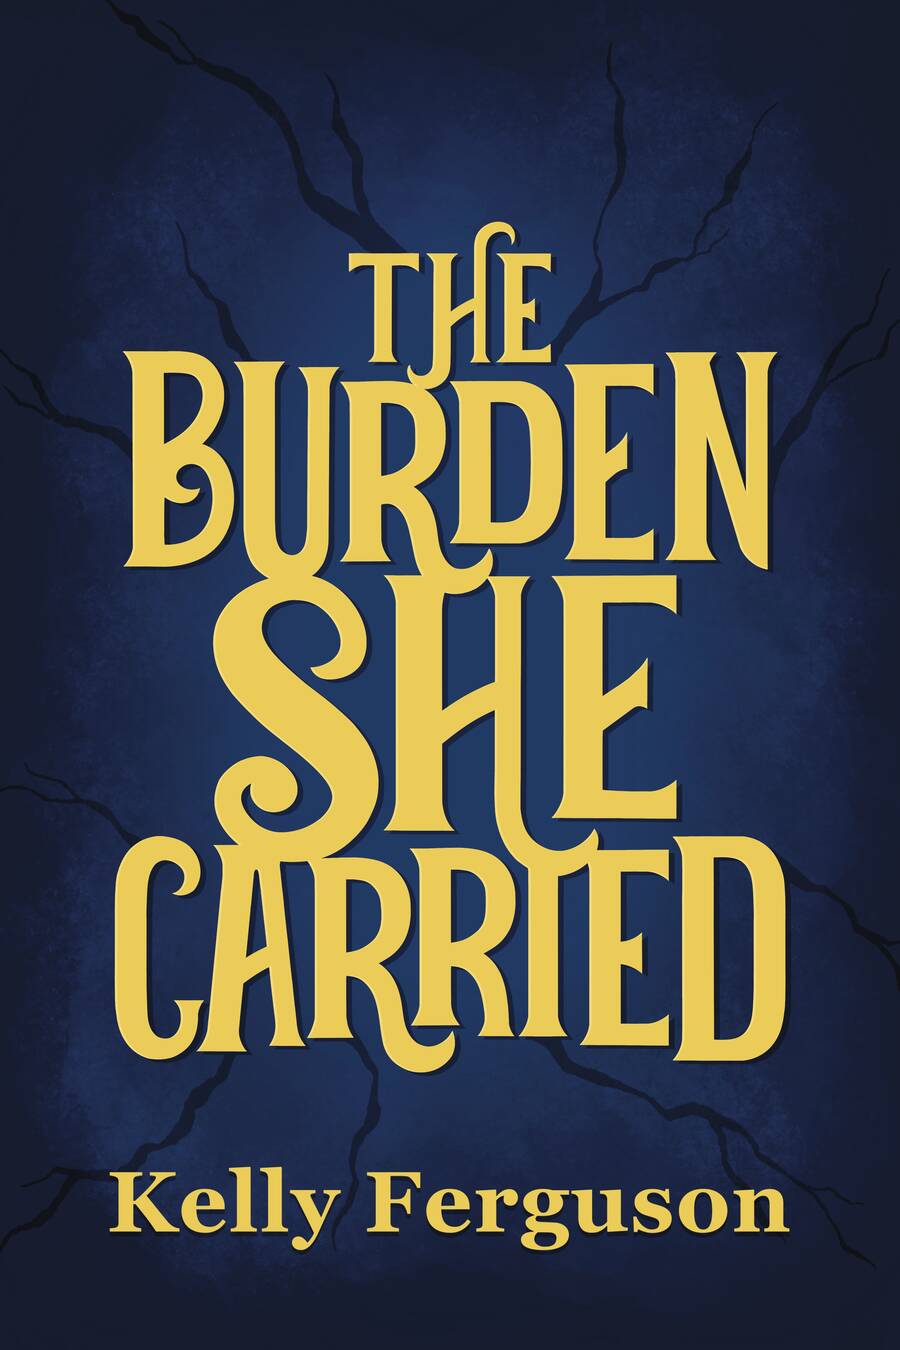 The Burden She Carried